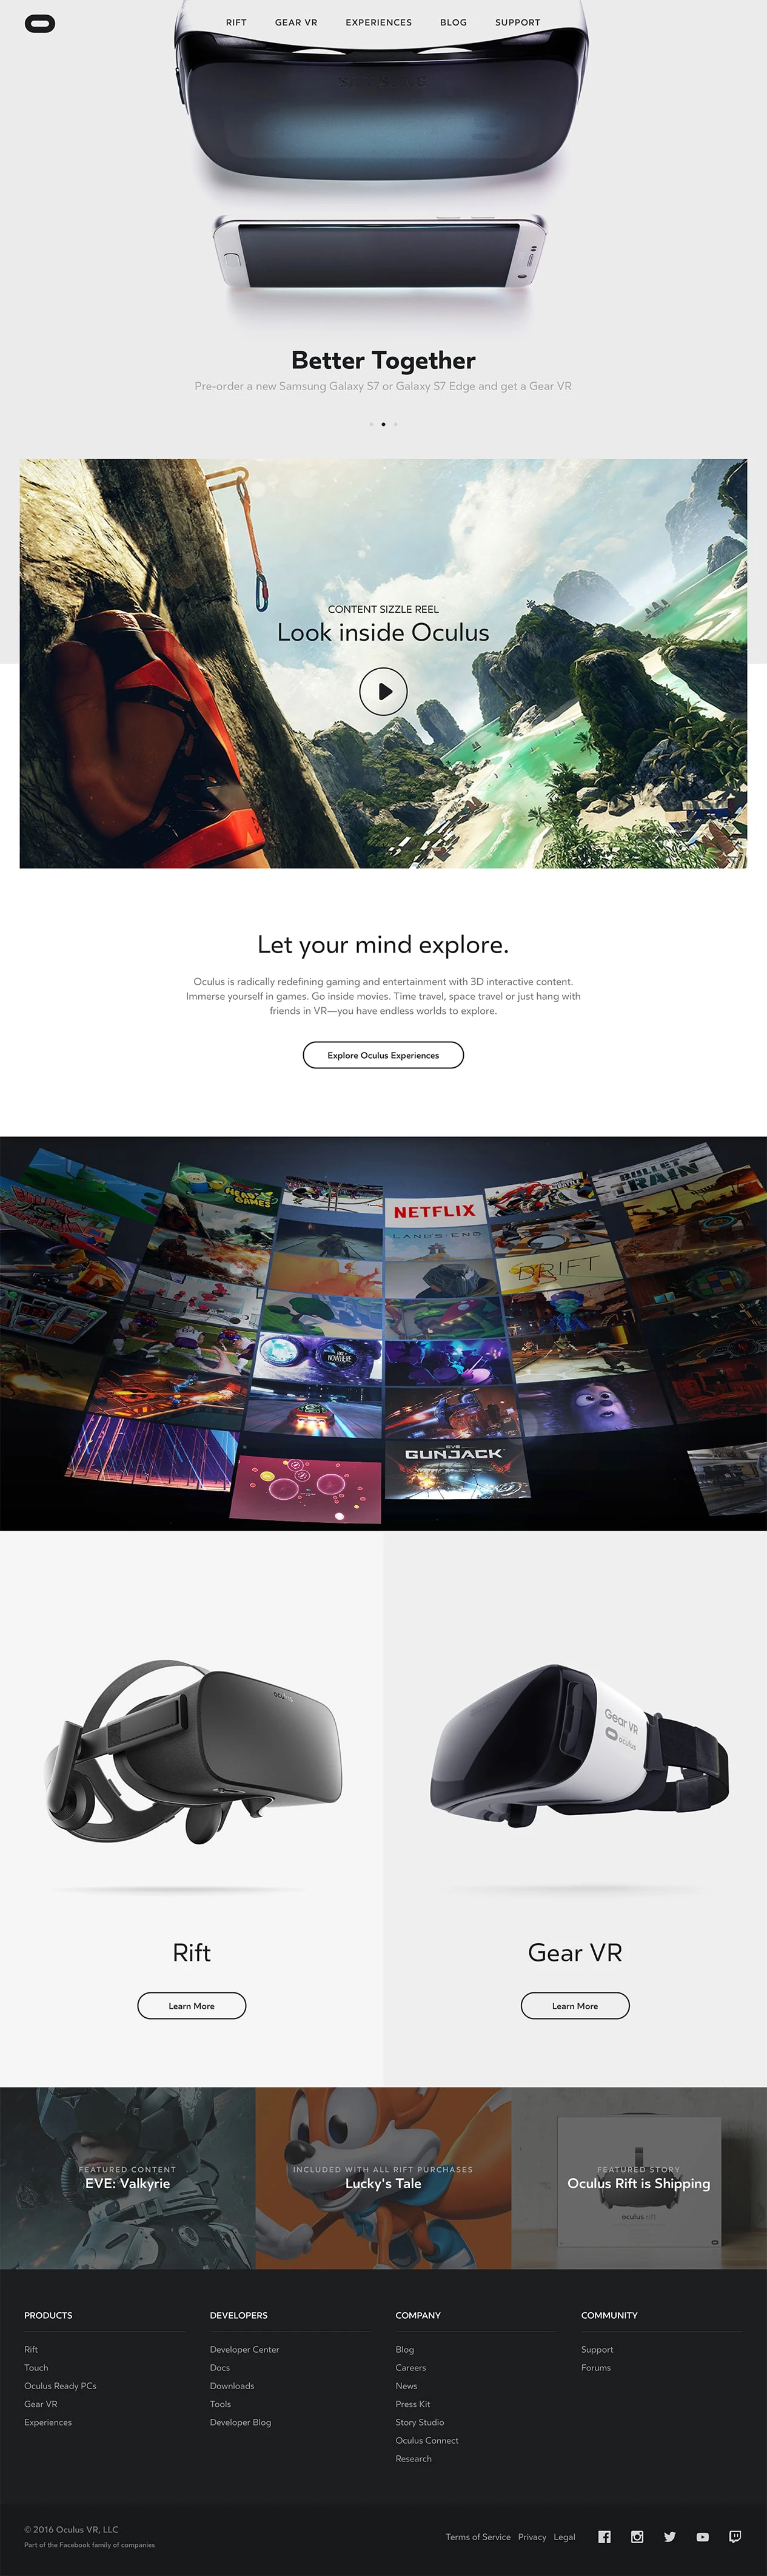 Oculus Landing Page Example: Oculus is making it possible to experience anything, anywhere, through the power of virtual reality. Visit to learn more about Gear VR and Oculus Rift.